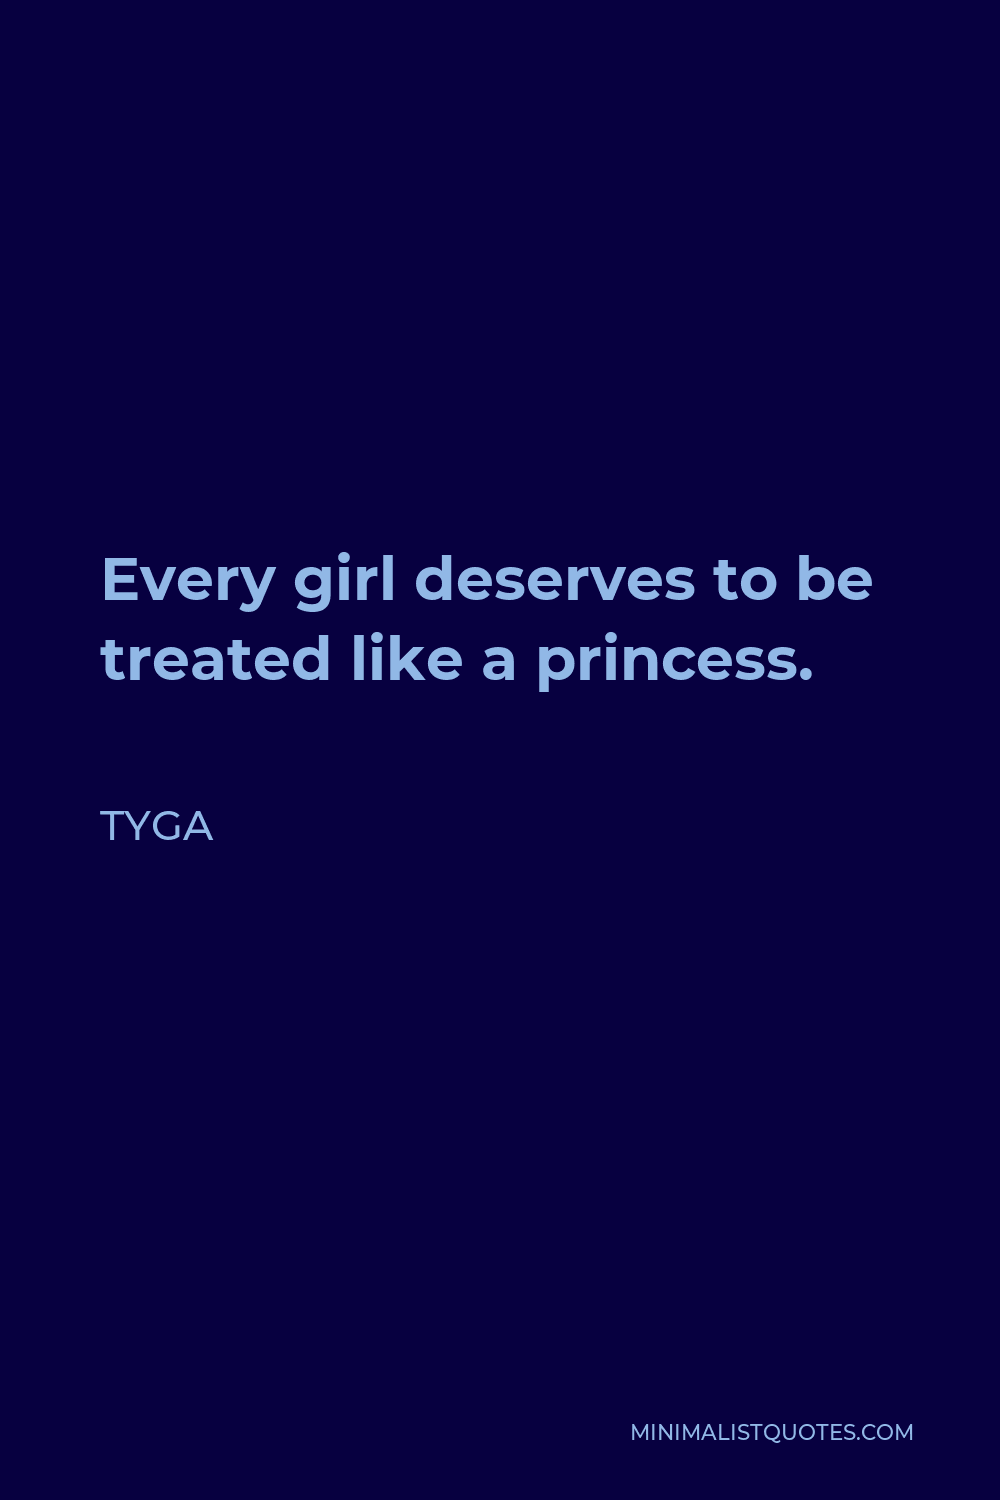 Tyga Quote - Every girl deserves to be treated like a princess.